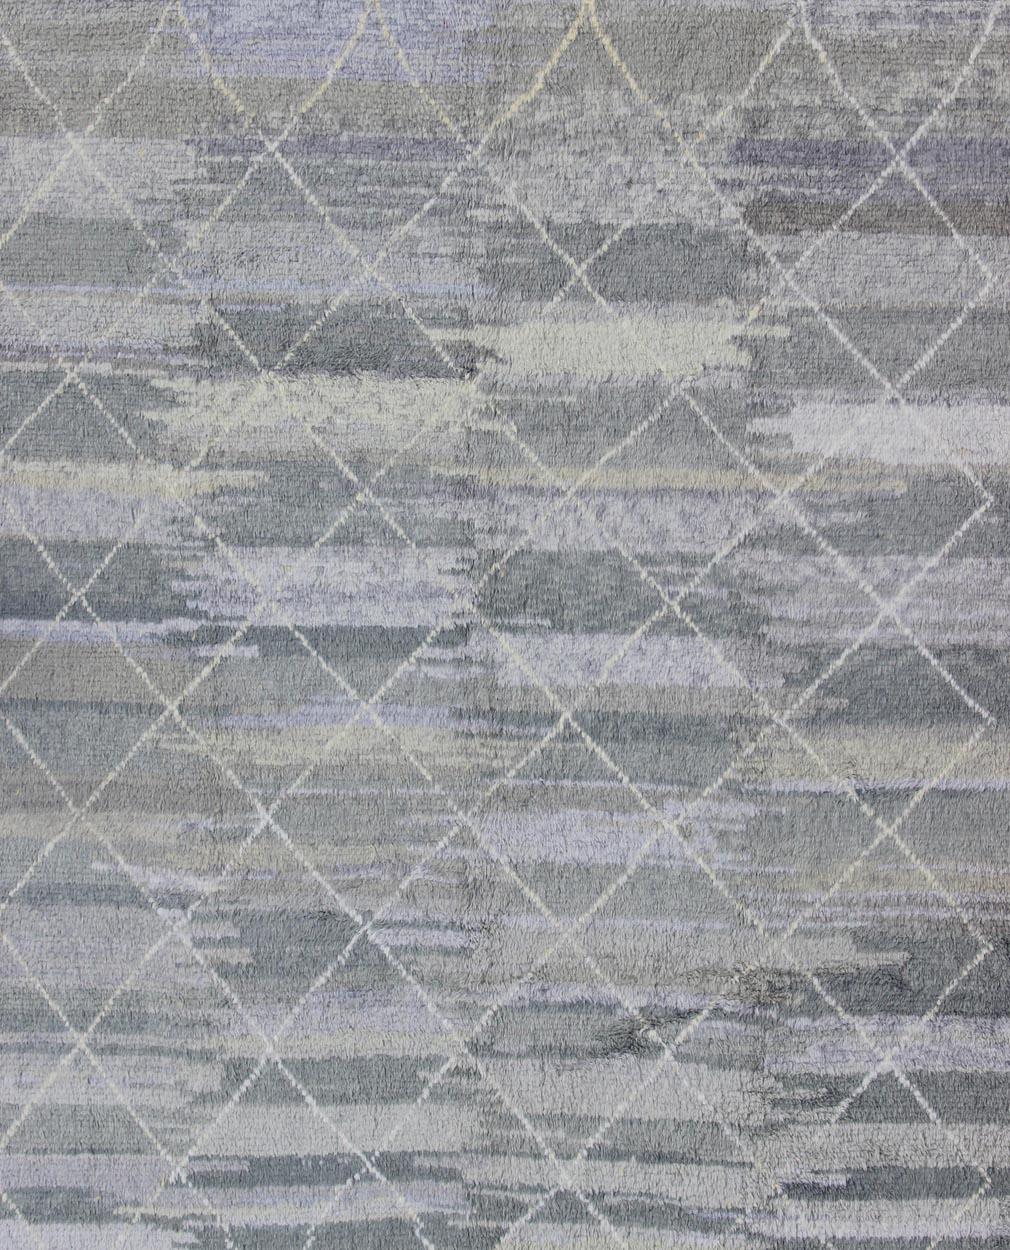 Turkish Modern Moroccan Rug with All-Over Lattice Design in Grey Tones